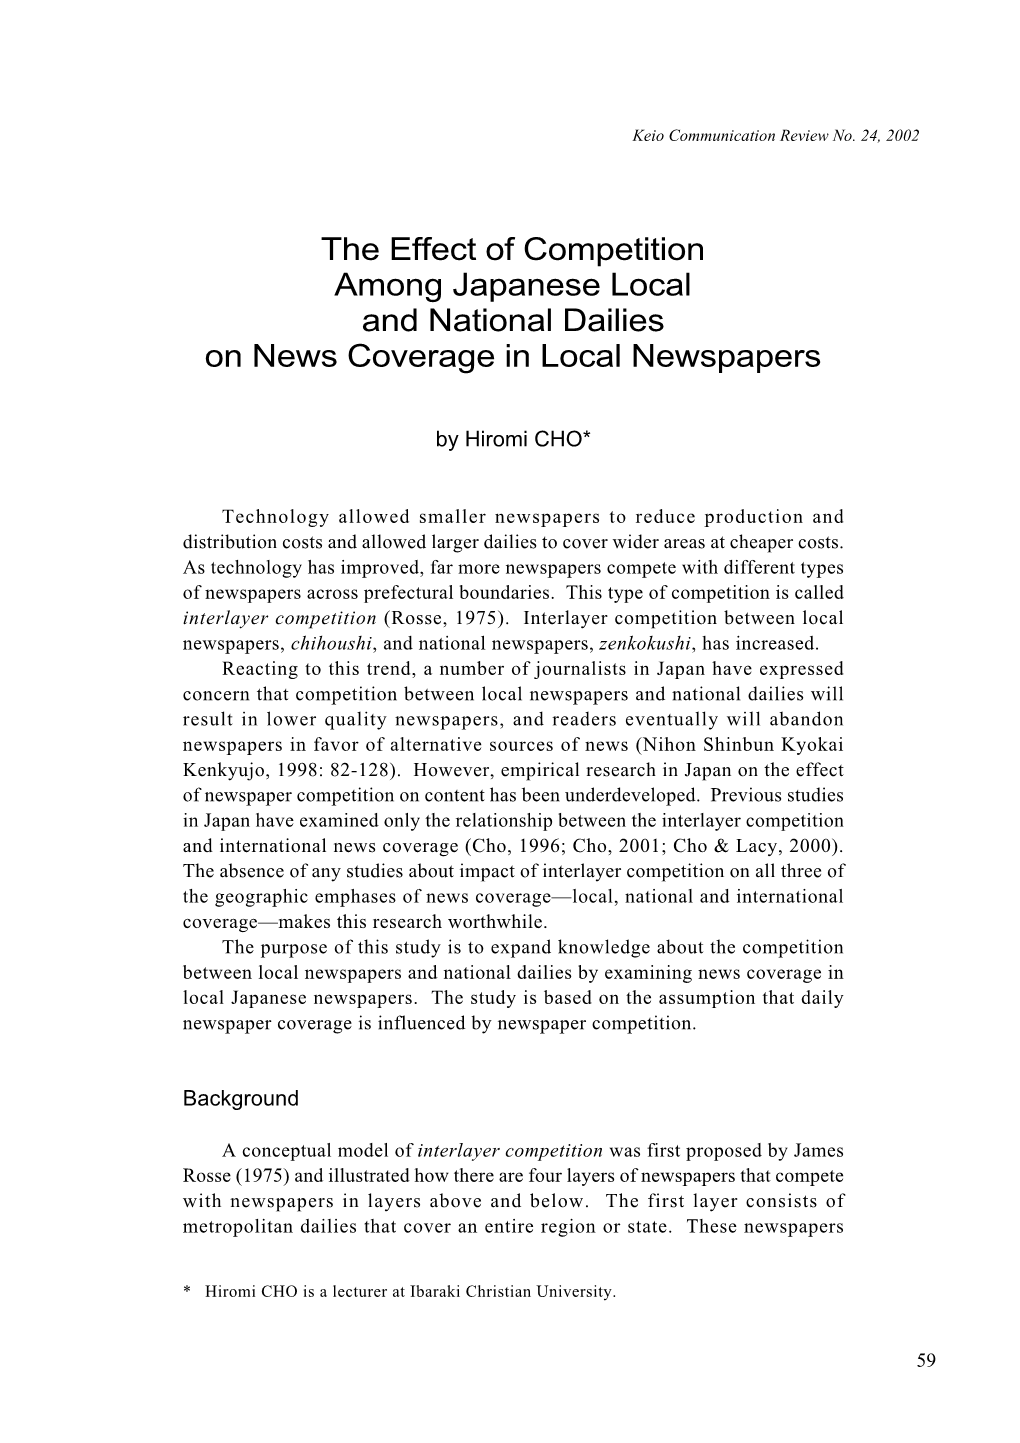 The Effect of Competition Among Japanese Local and National Dailies on News Coverage in Local Newspapers